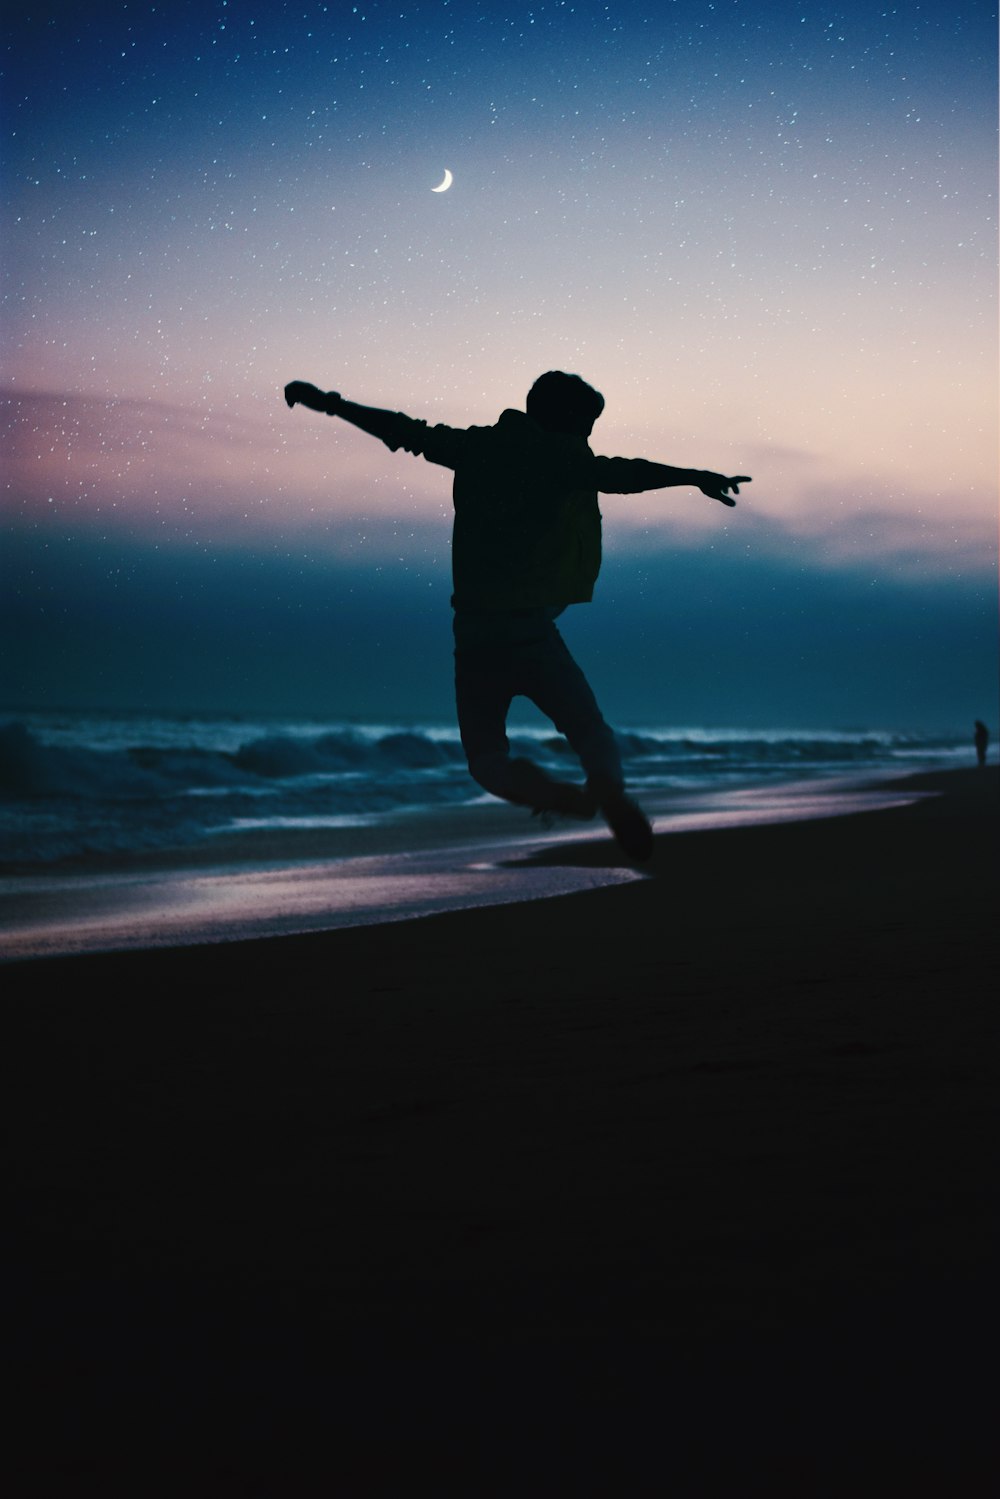 silhouette of man jumping on beach during night time